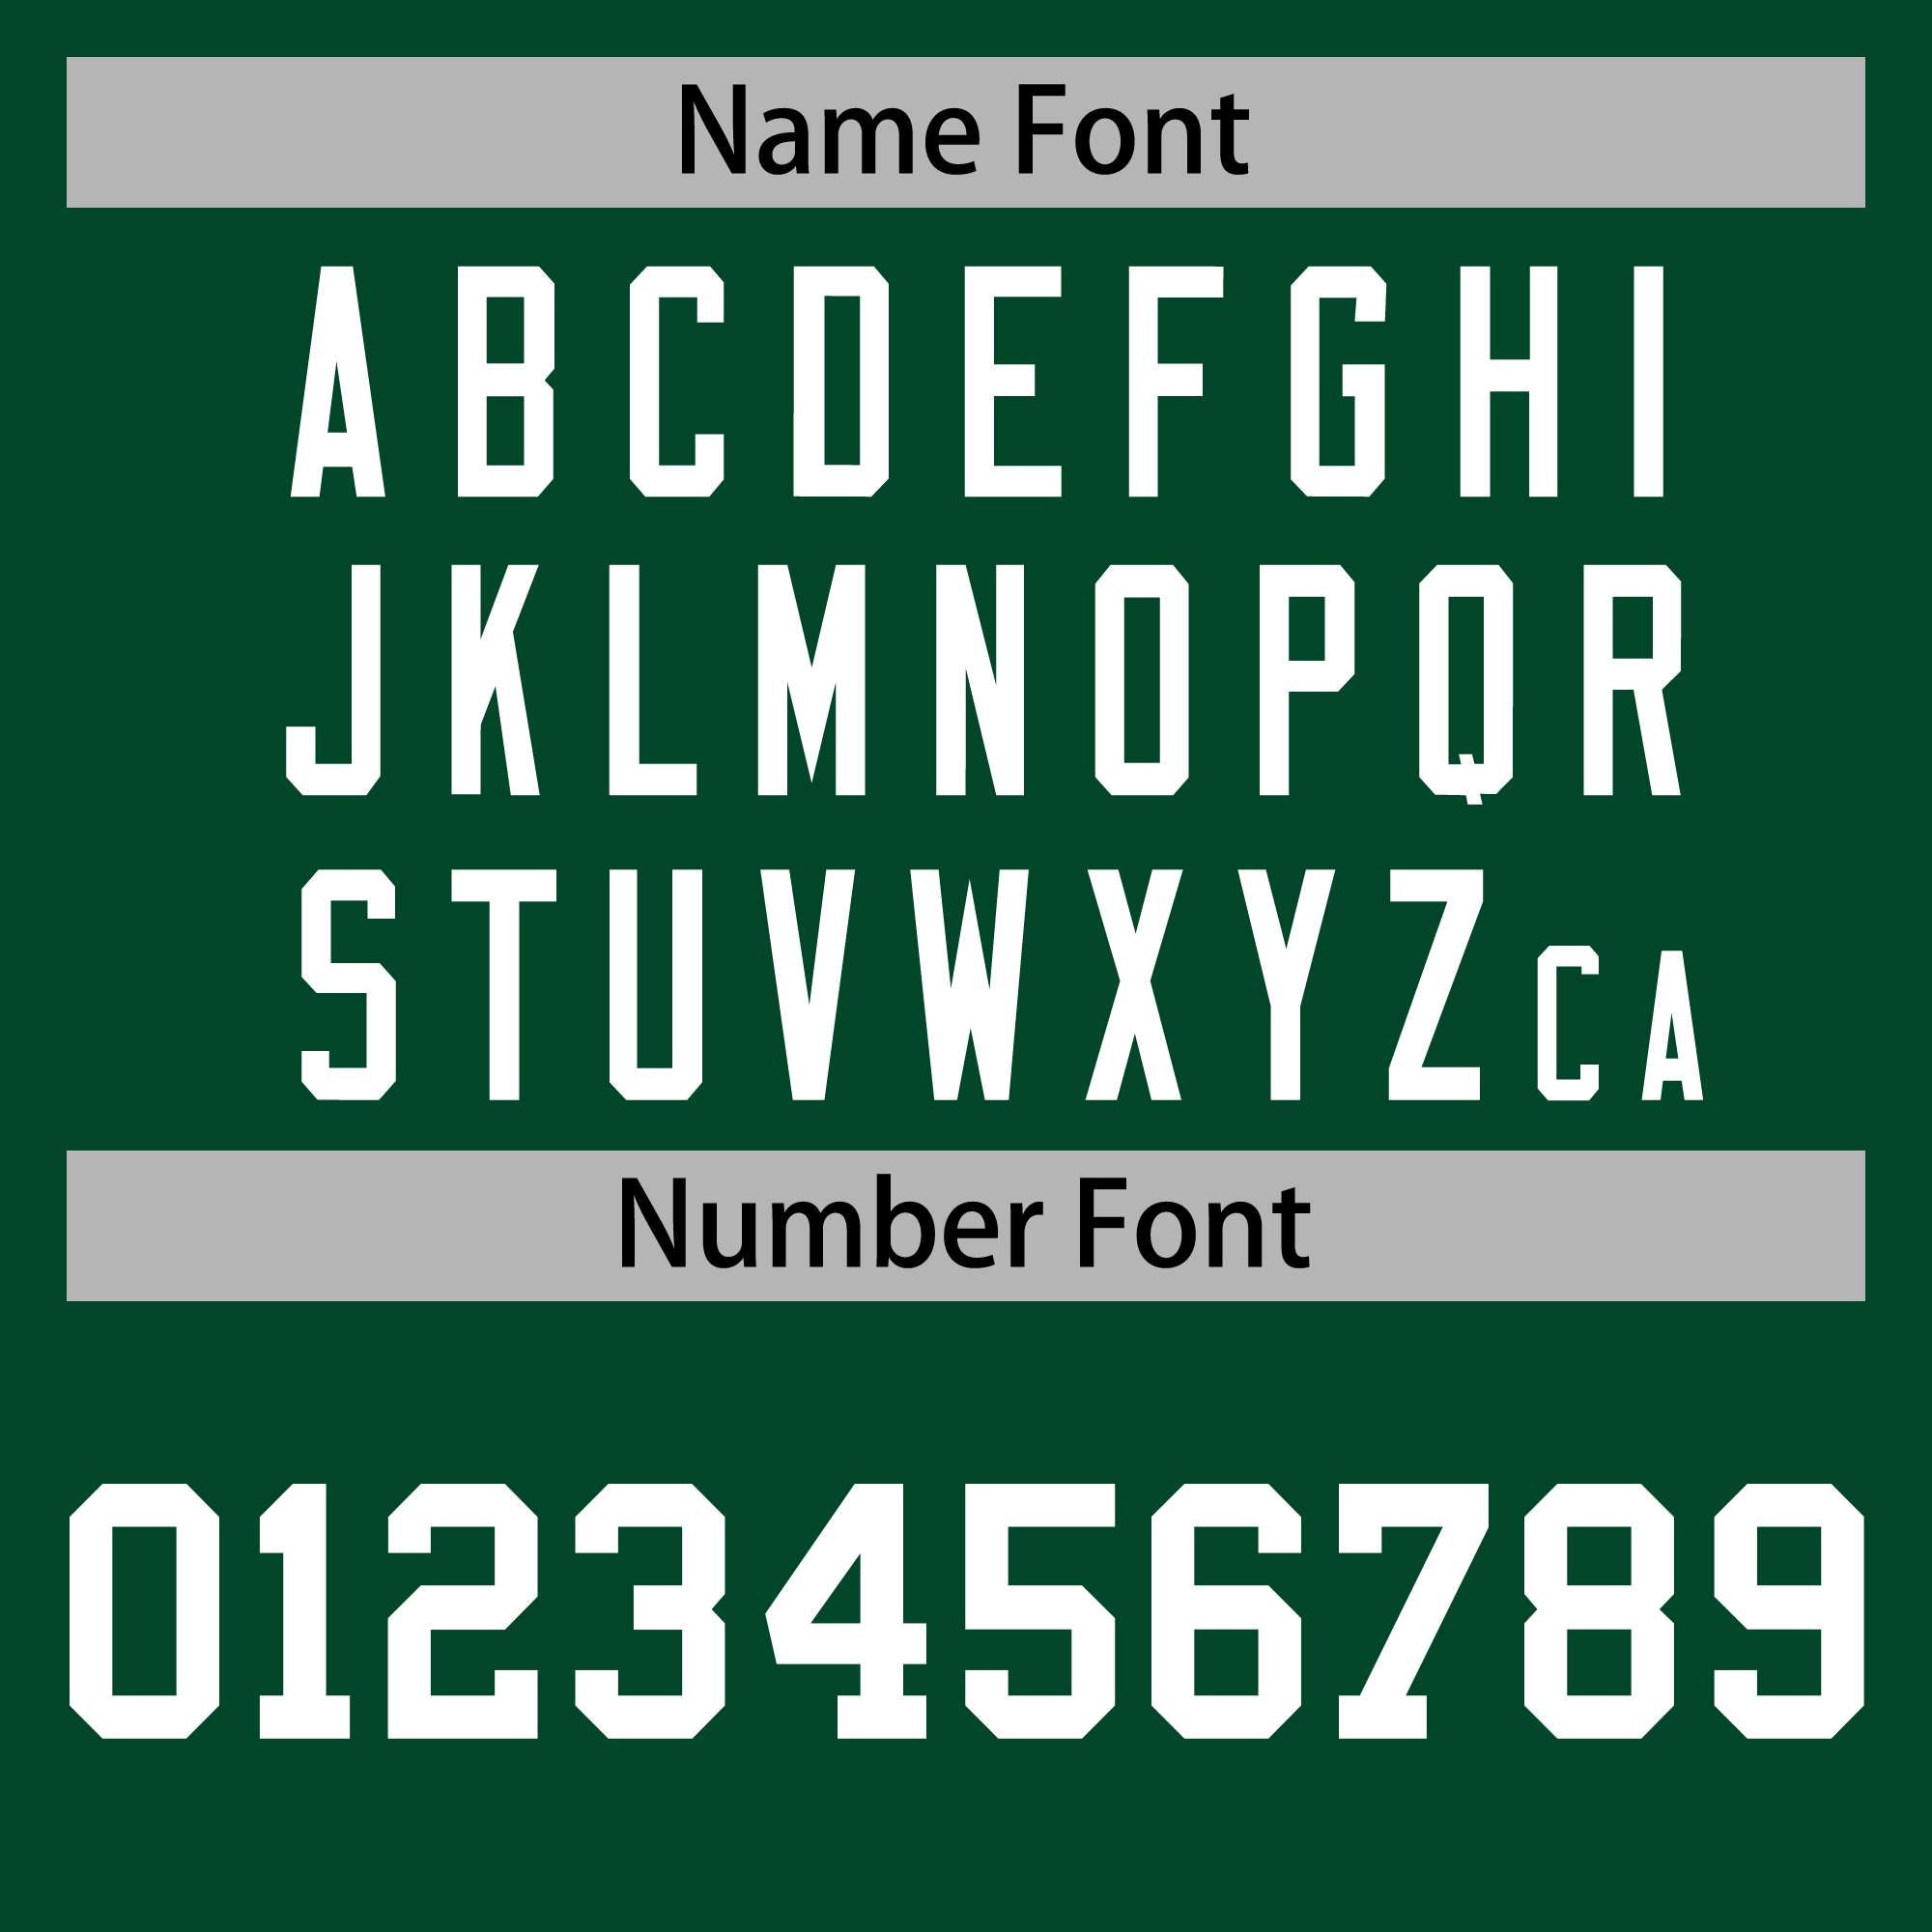 custom green pullover hoodies name and number font